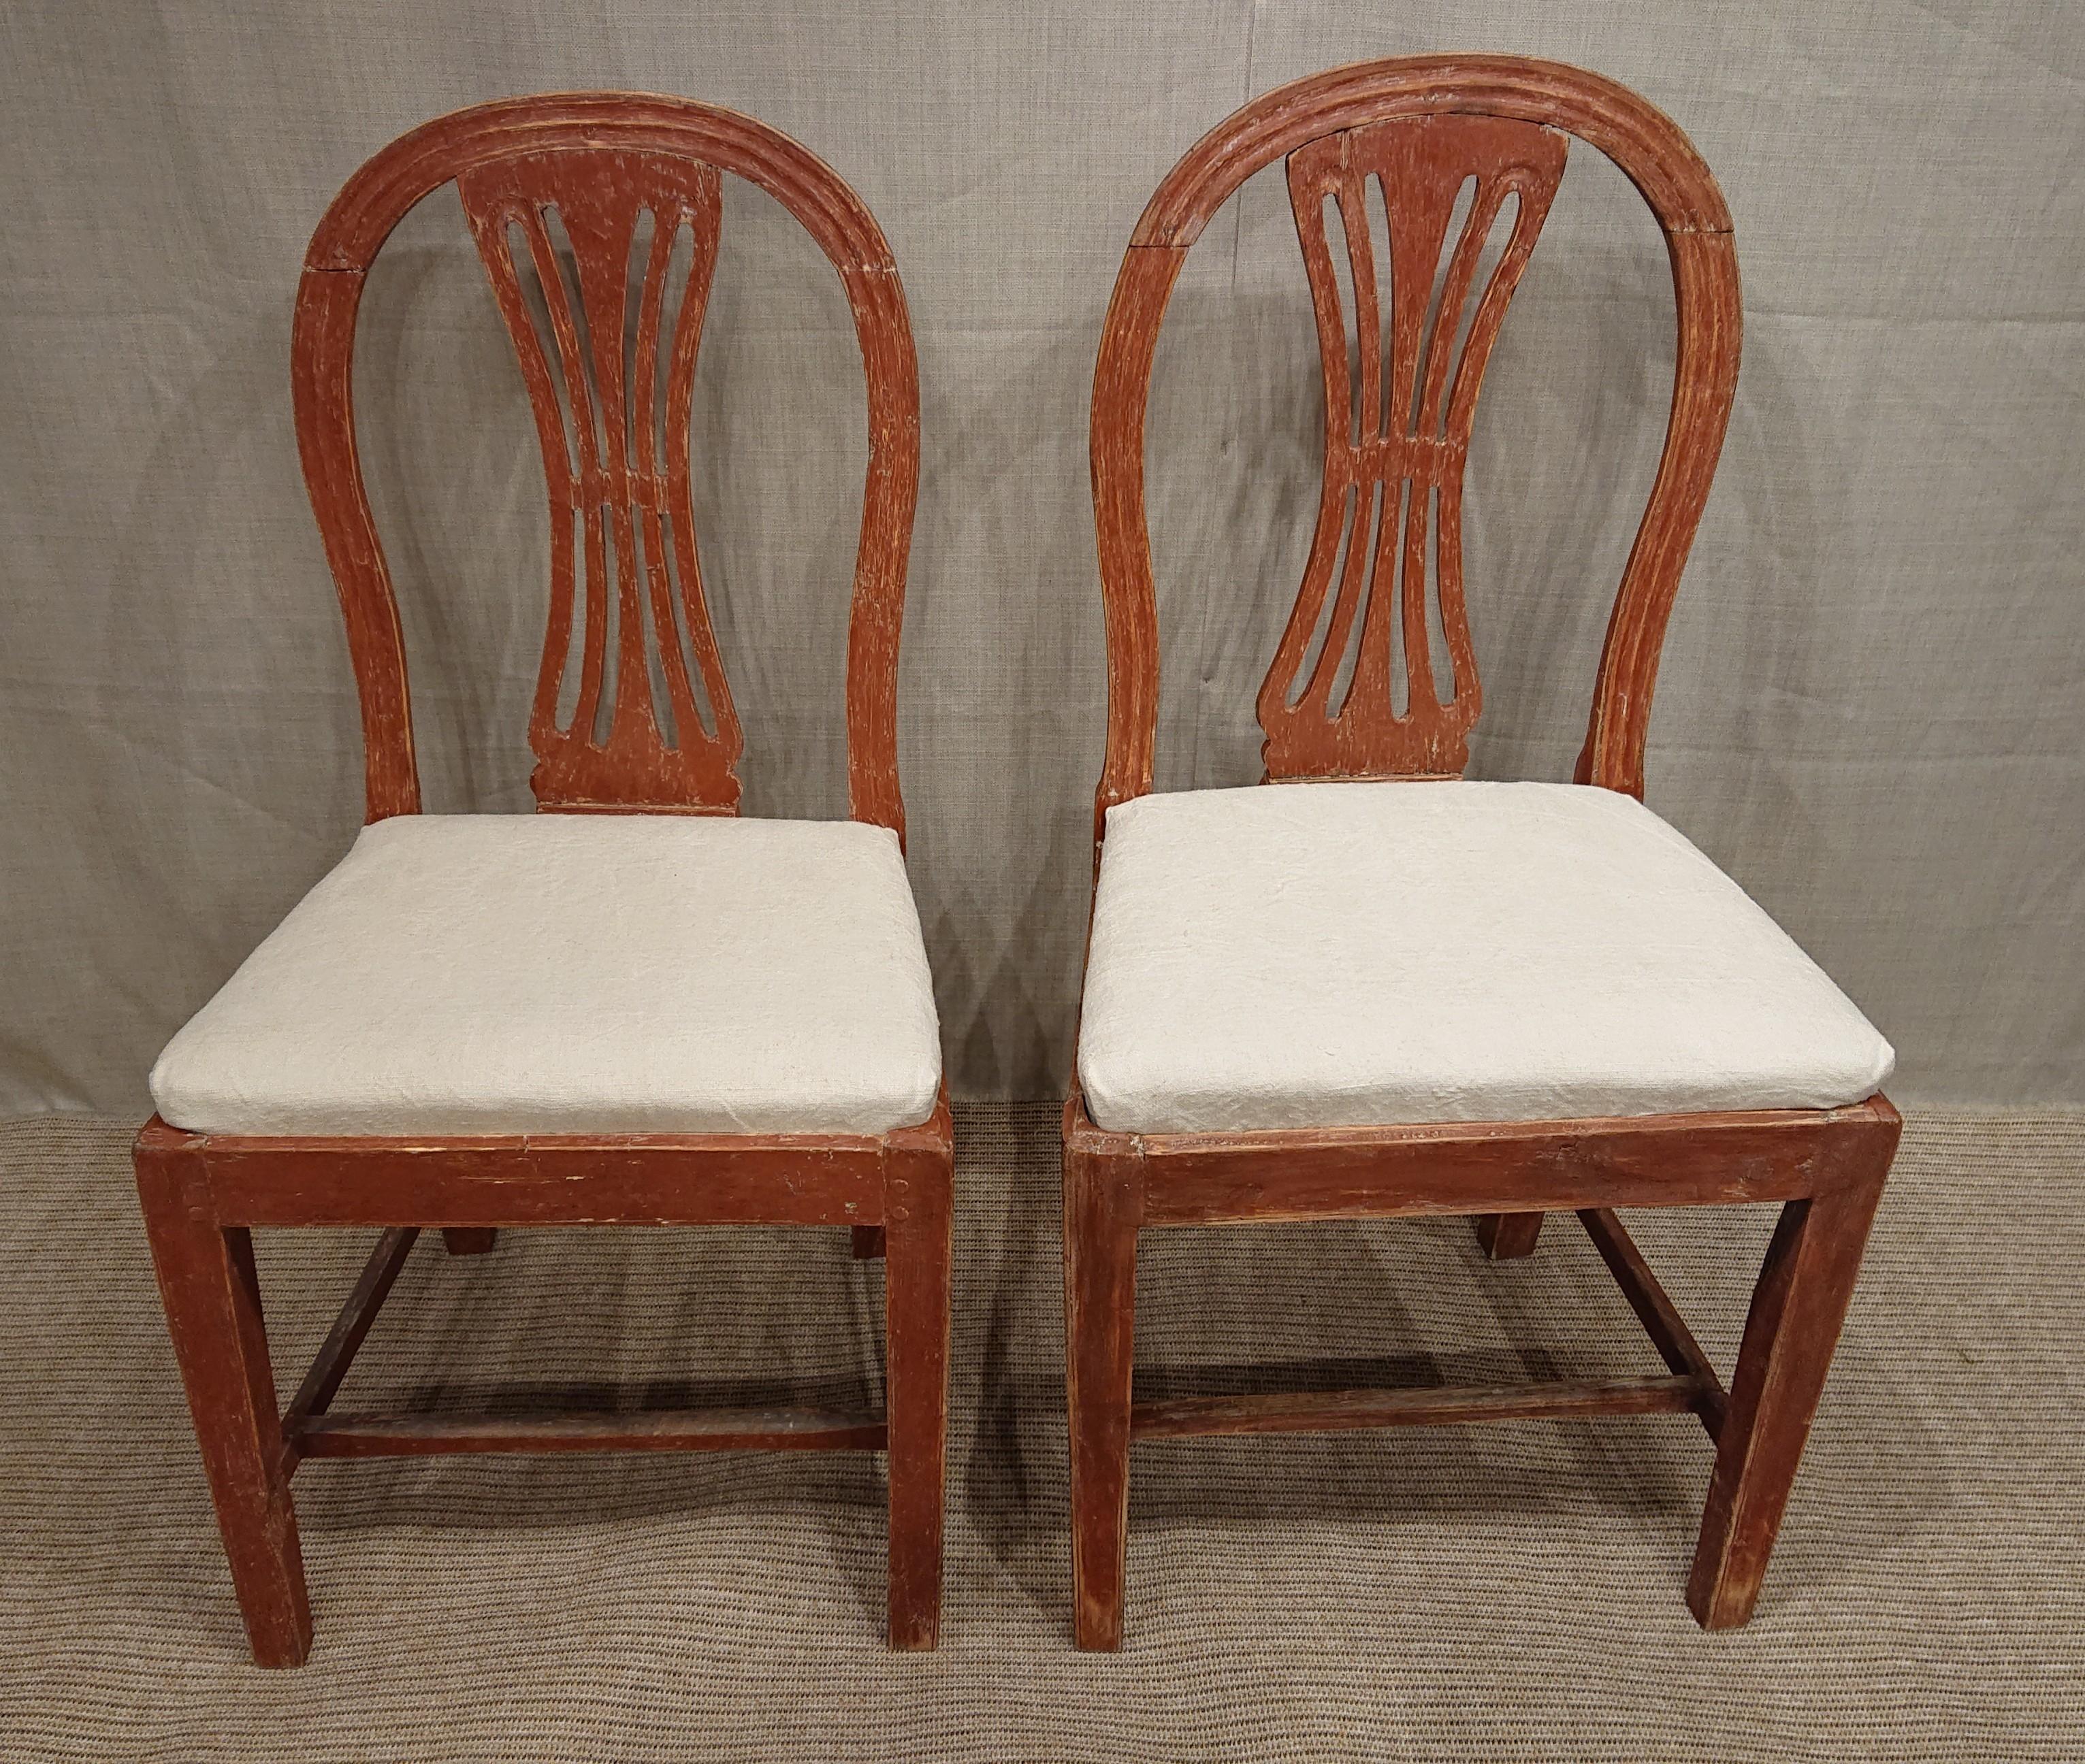 A pair of 19th century Swedish Gustavian chairs from Smaland, Southern Sweden.
Scraped by hand to its original paint.
The seats are upholstered in a linen fabric.
Nice model with ribs in the back.
Made in painted pine.
The chairs have different